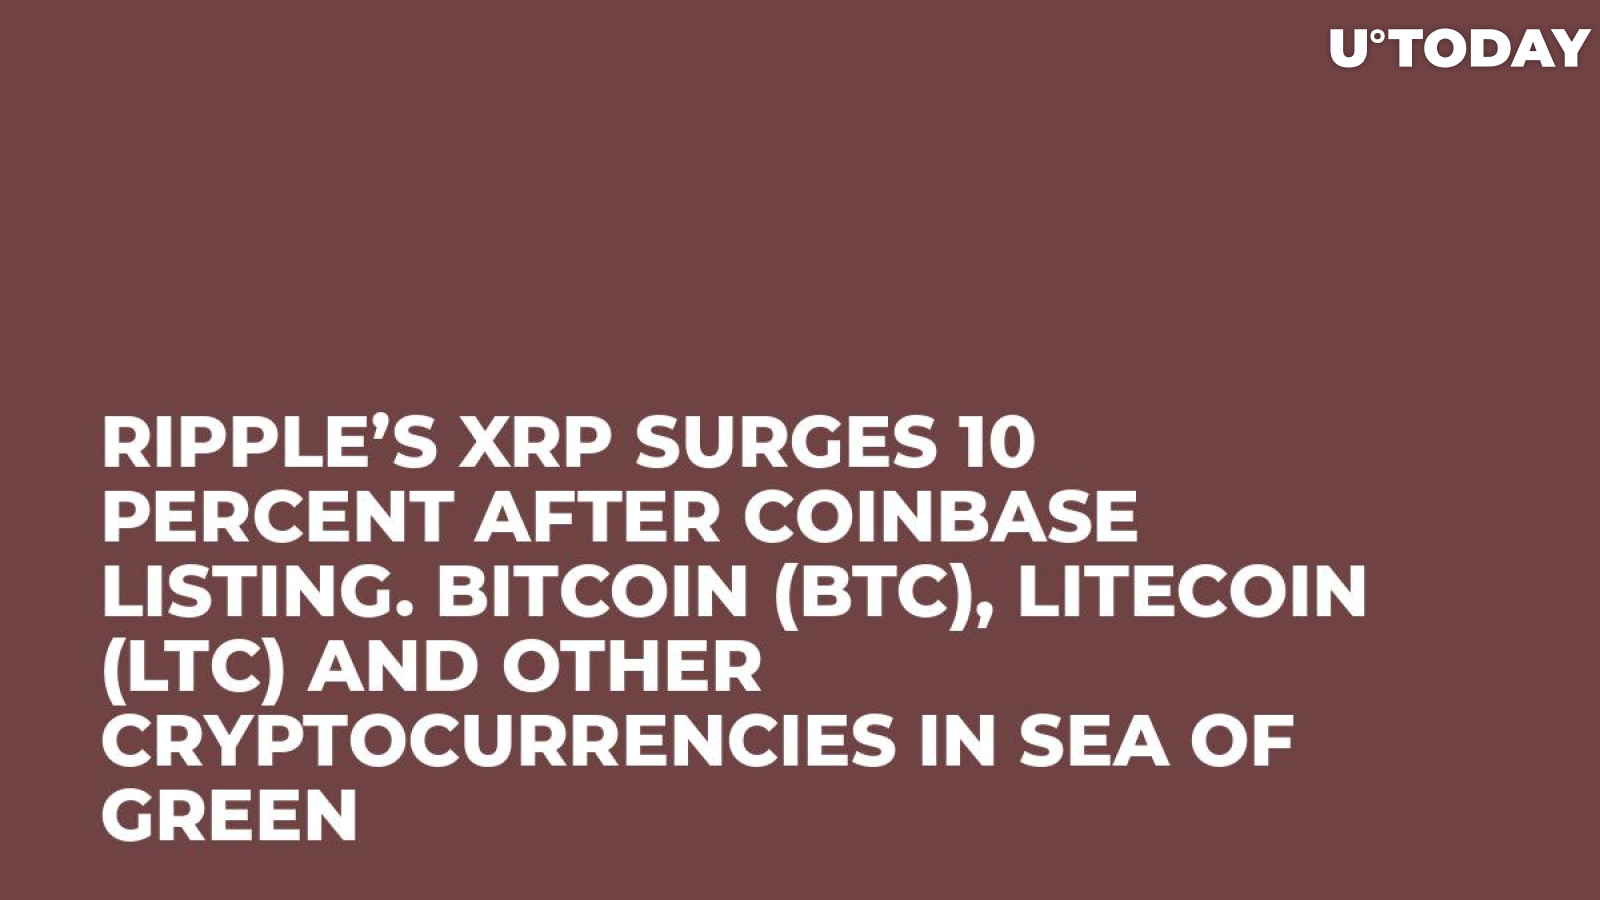 Ripple’s XRP Surges 10 Percent After Coinbase Listing. Bitcoin (BTC), Litecoin (LTC) and Other Cryptocurrencies in Sea of Green 